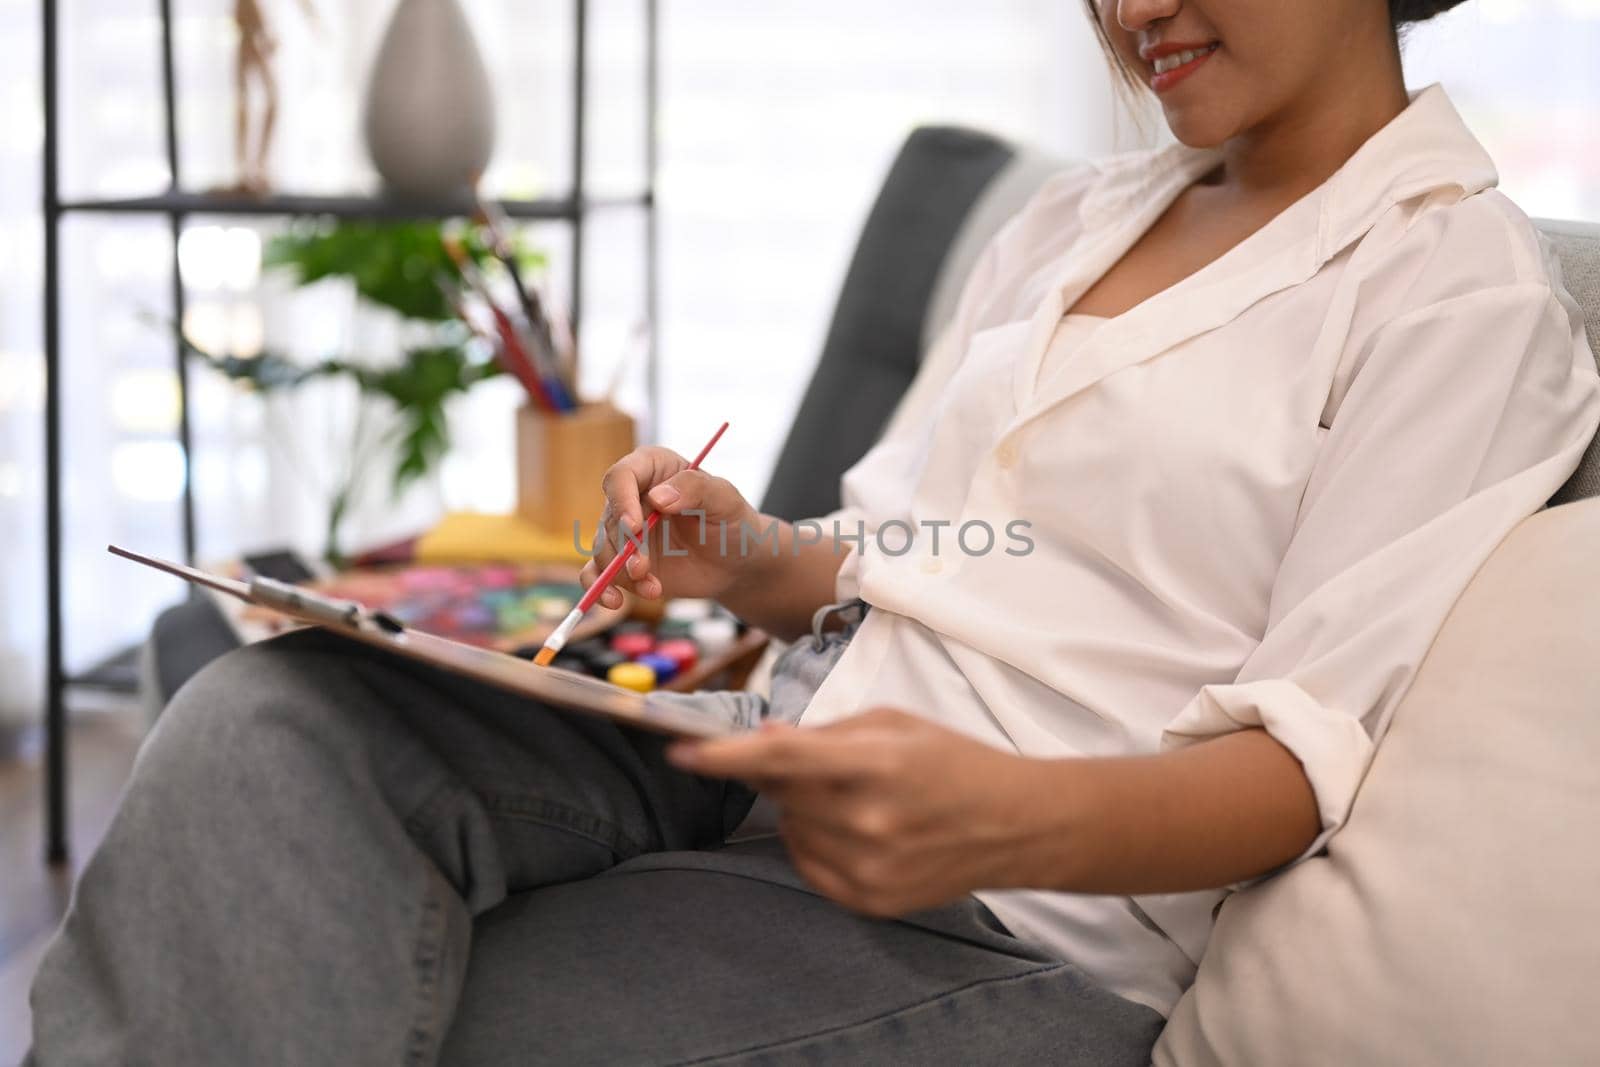 Relaxed young woman sitting on couch and painting picture with watercolor. Art, creative hobby and leisure activity concept by prathanchorruangsak